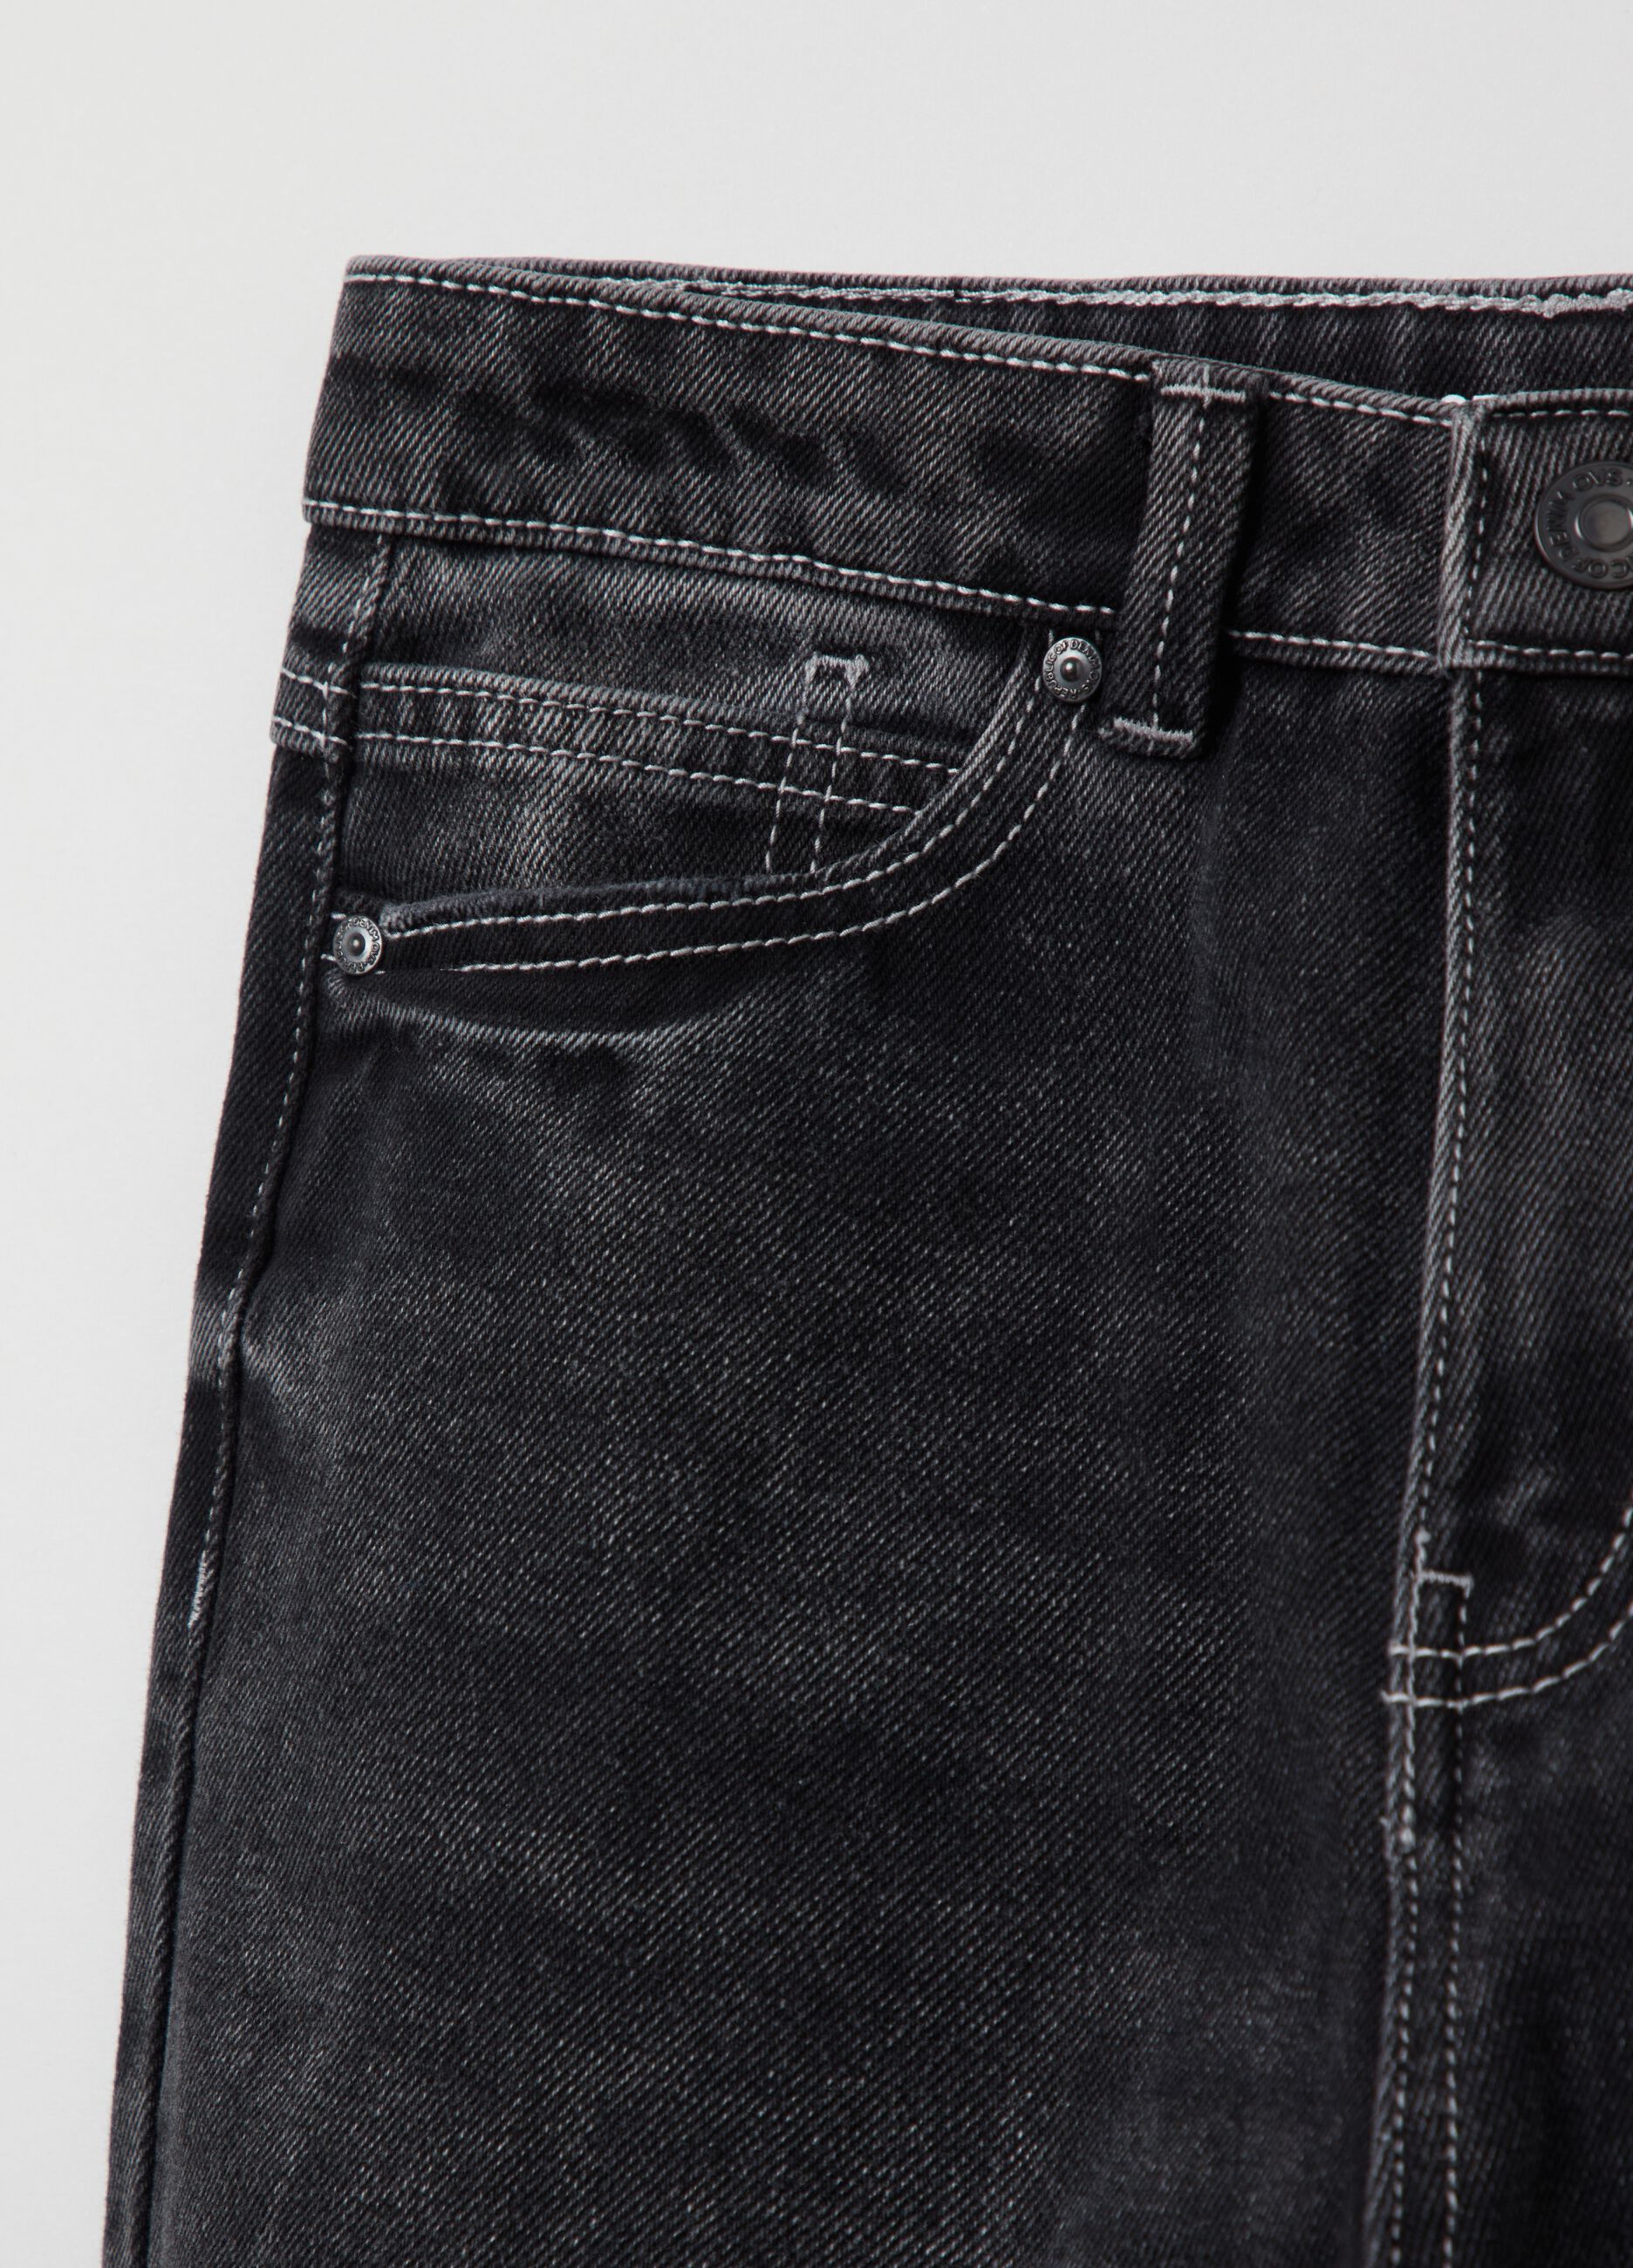 Cropped-fit jeans with five pockets